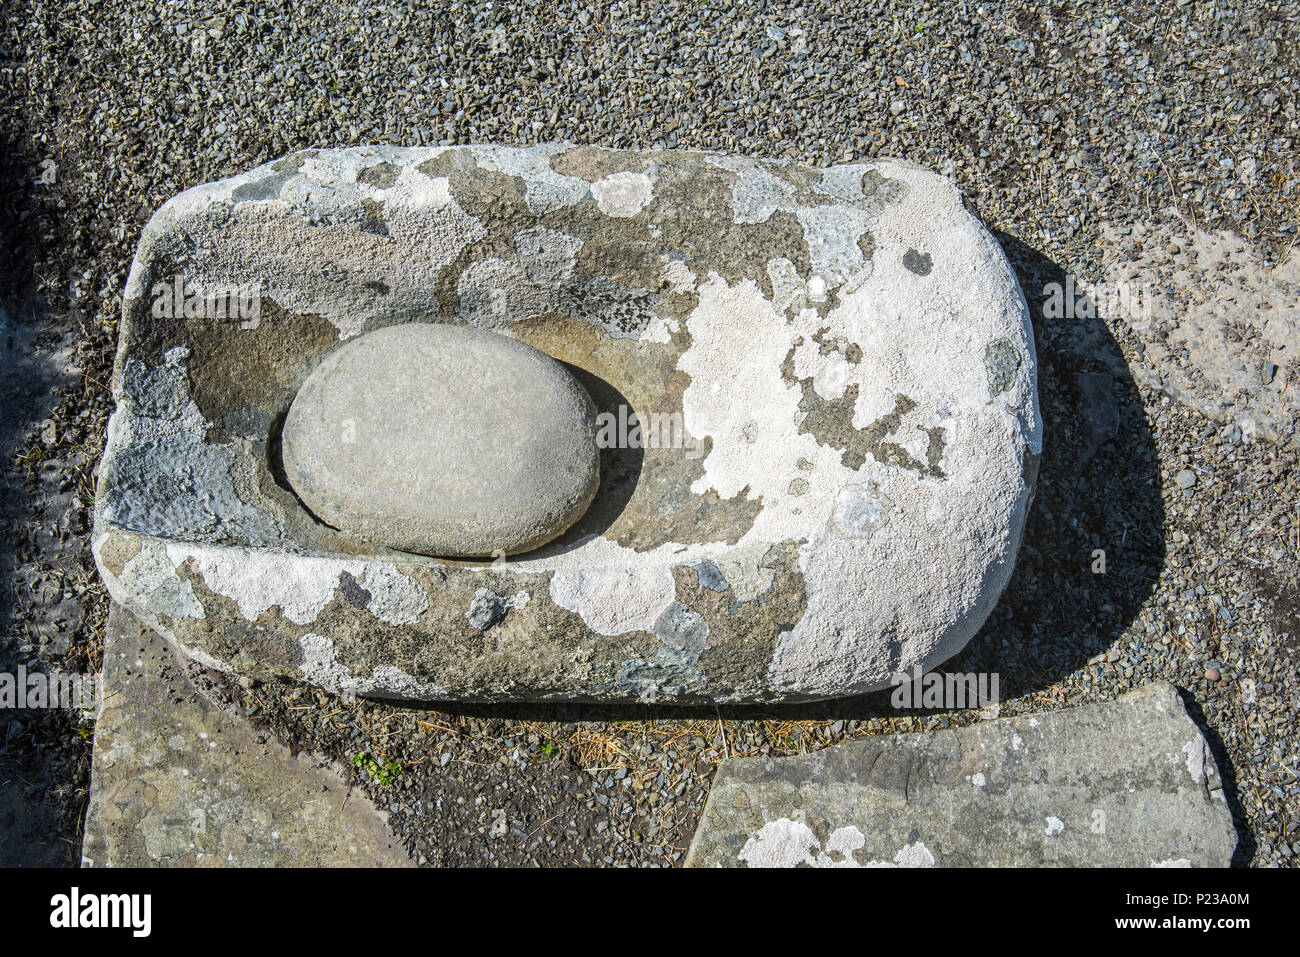 Stone quern at Jarlshof, archaeological site showing 2500 BC prehistoric and Norse settlements at Sumburgh Head, Shetland Islands, Scotland, UK Stock Photo